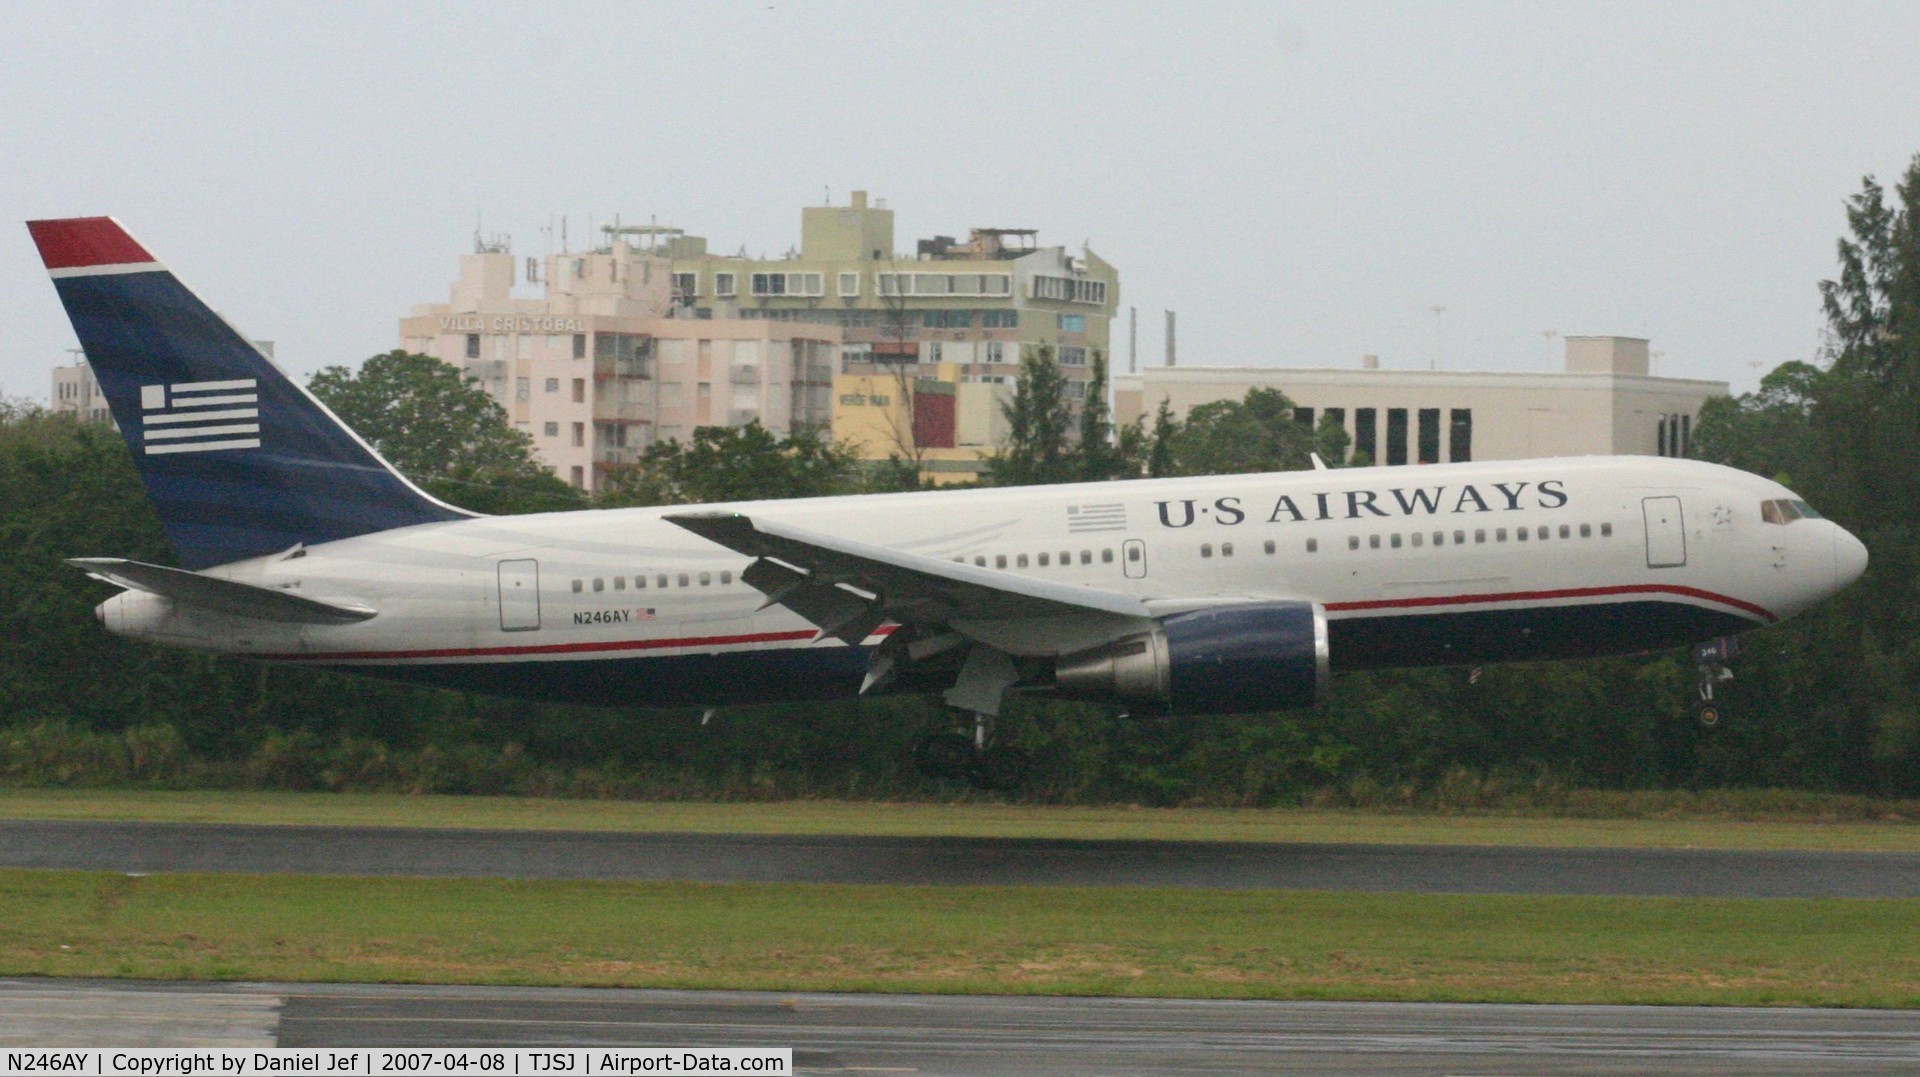 N246AY, 1987 Boeing 767-201ER C/N 23898, US Airways just befor touching down at TJSJ on a wet day